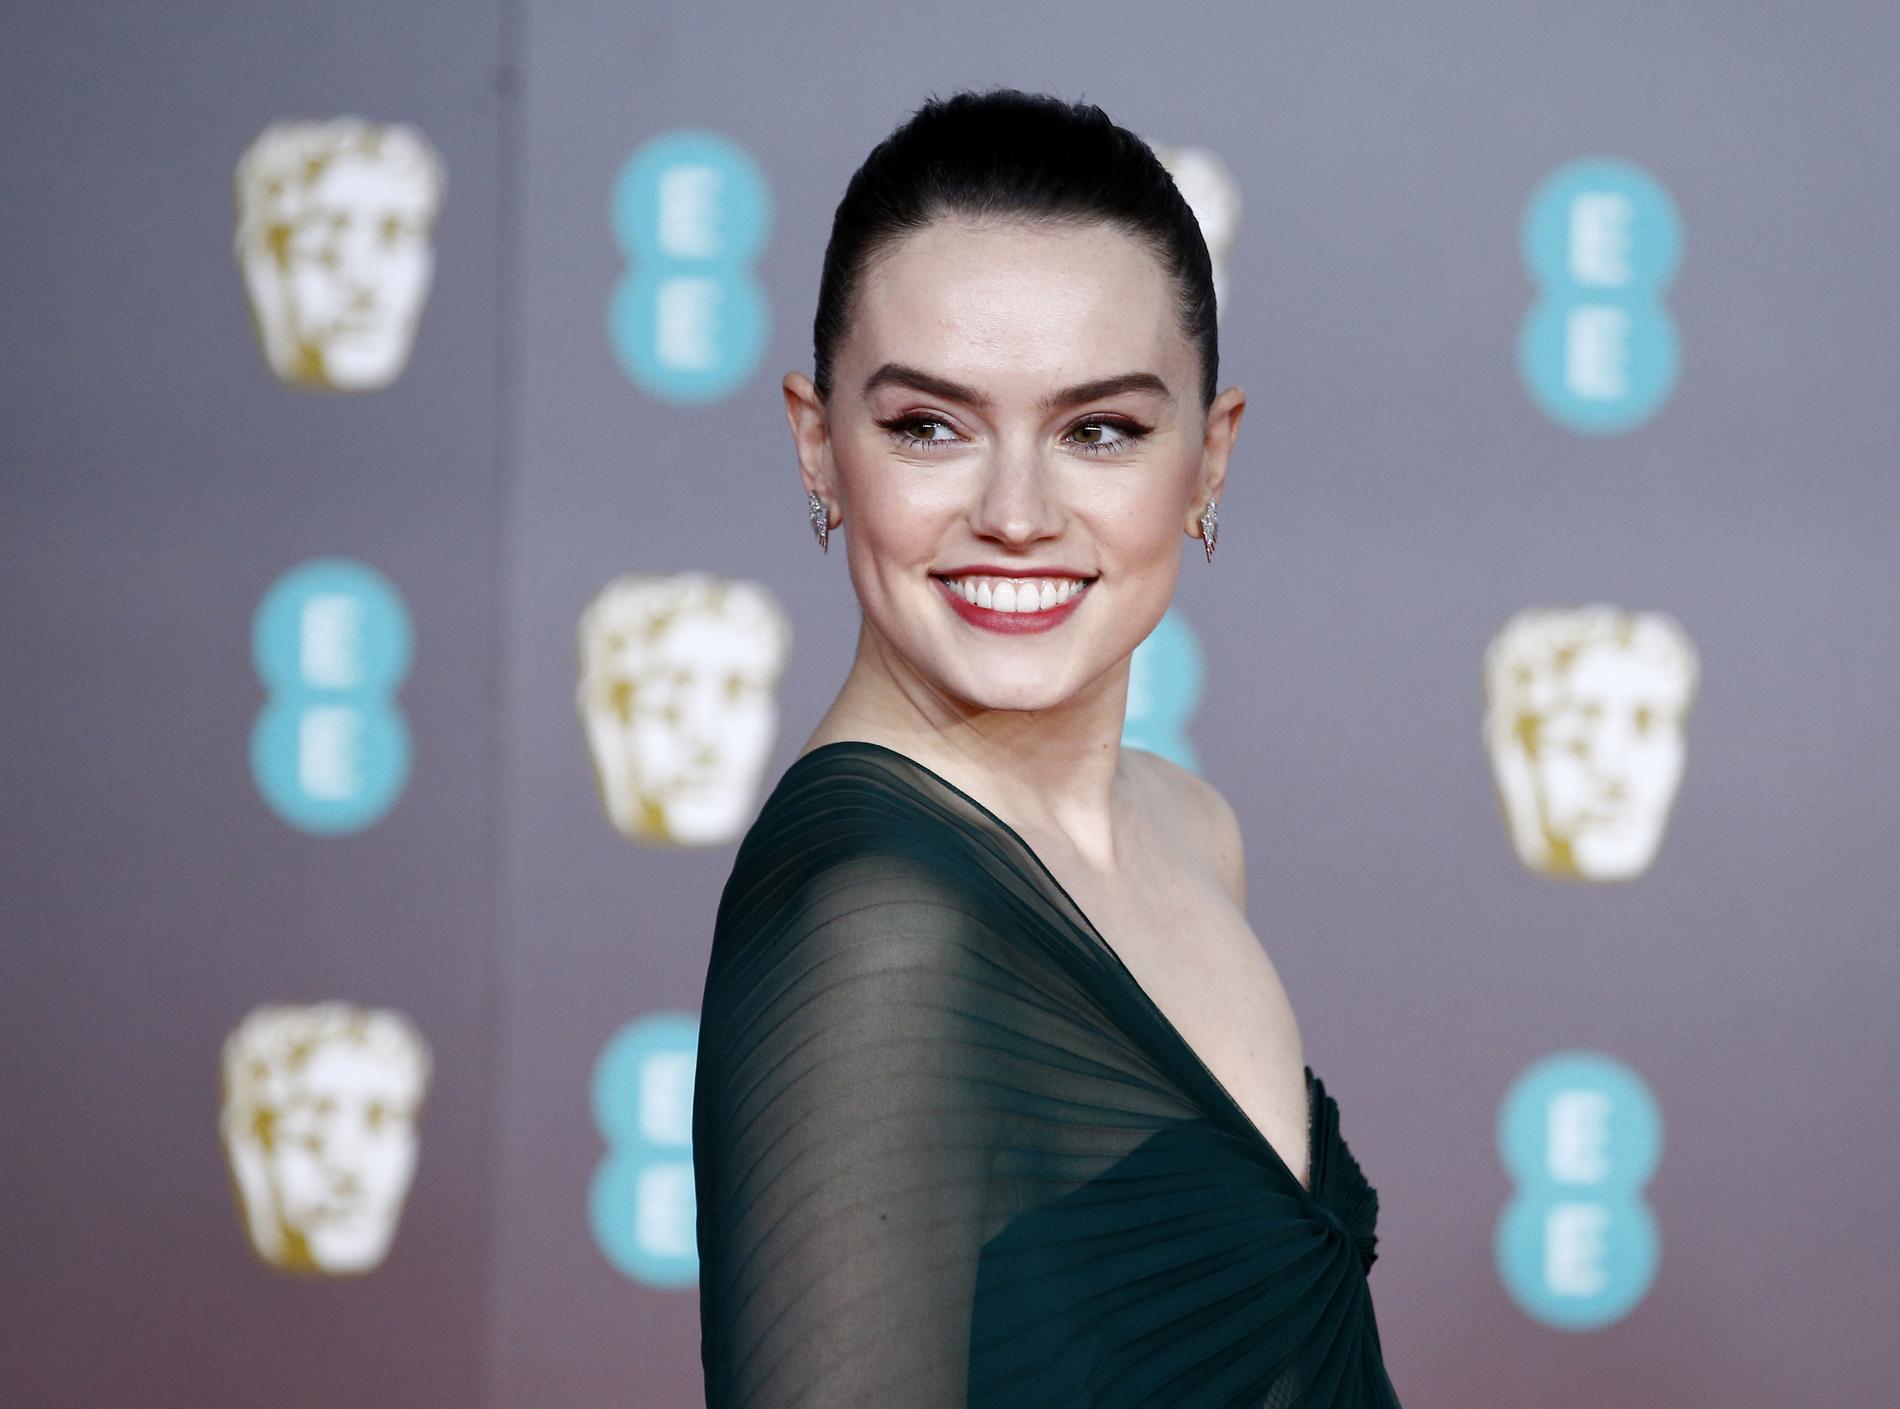 Daisy Ridley stars in the new “Star Wars” movie